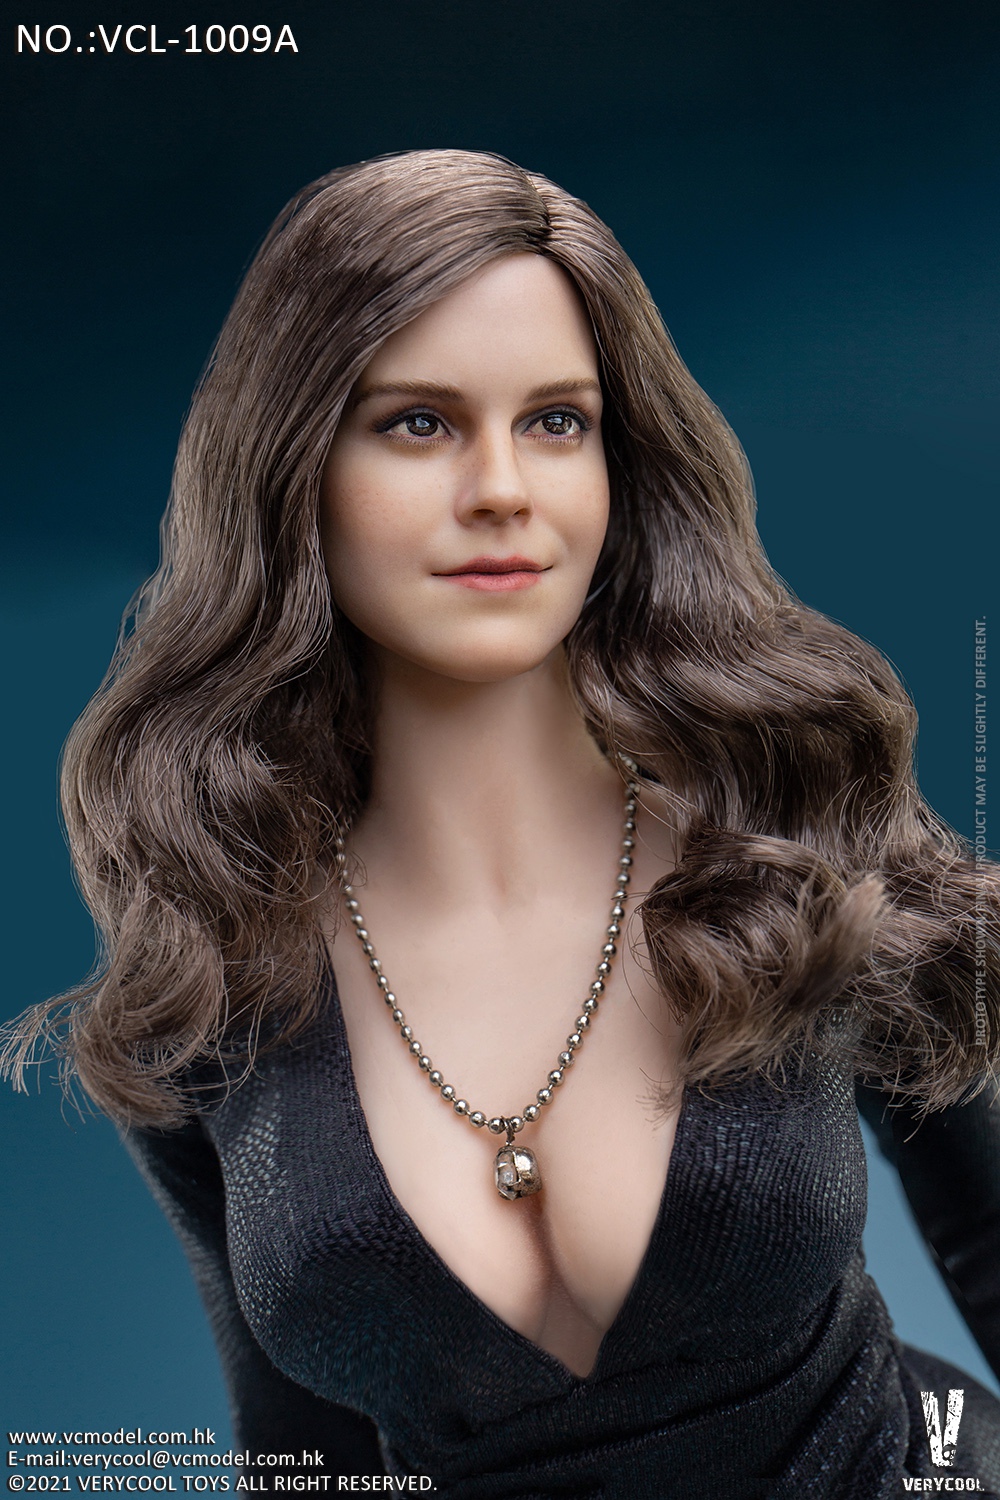 NEW PRODUCT: VERYCOOL : 1/6 Western Actress Head Sculpture VCL-1009 A-D 23160810